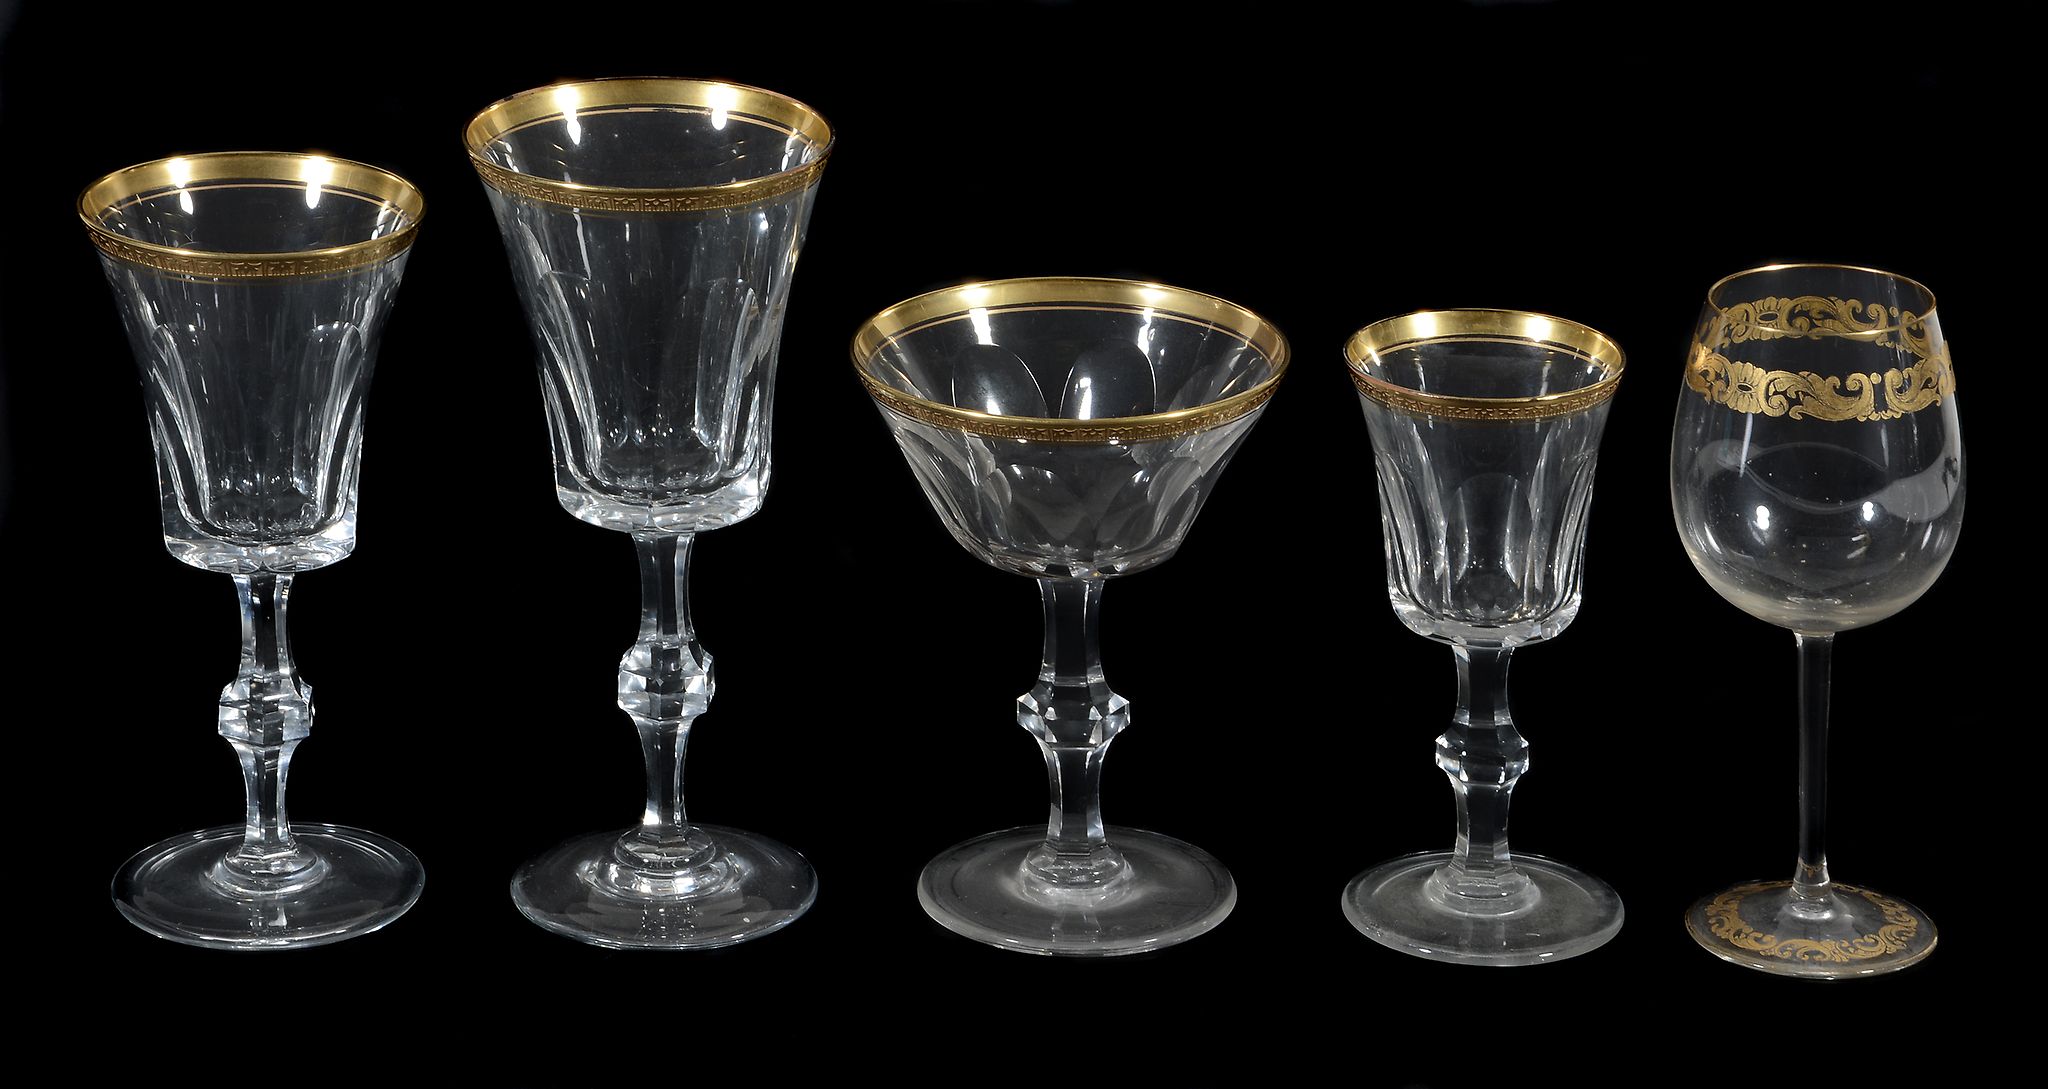 A clear glass and gilt part table service in the Baccarat style  A clear glass and gilt part table